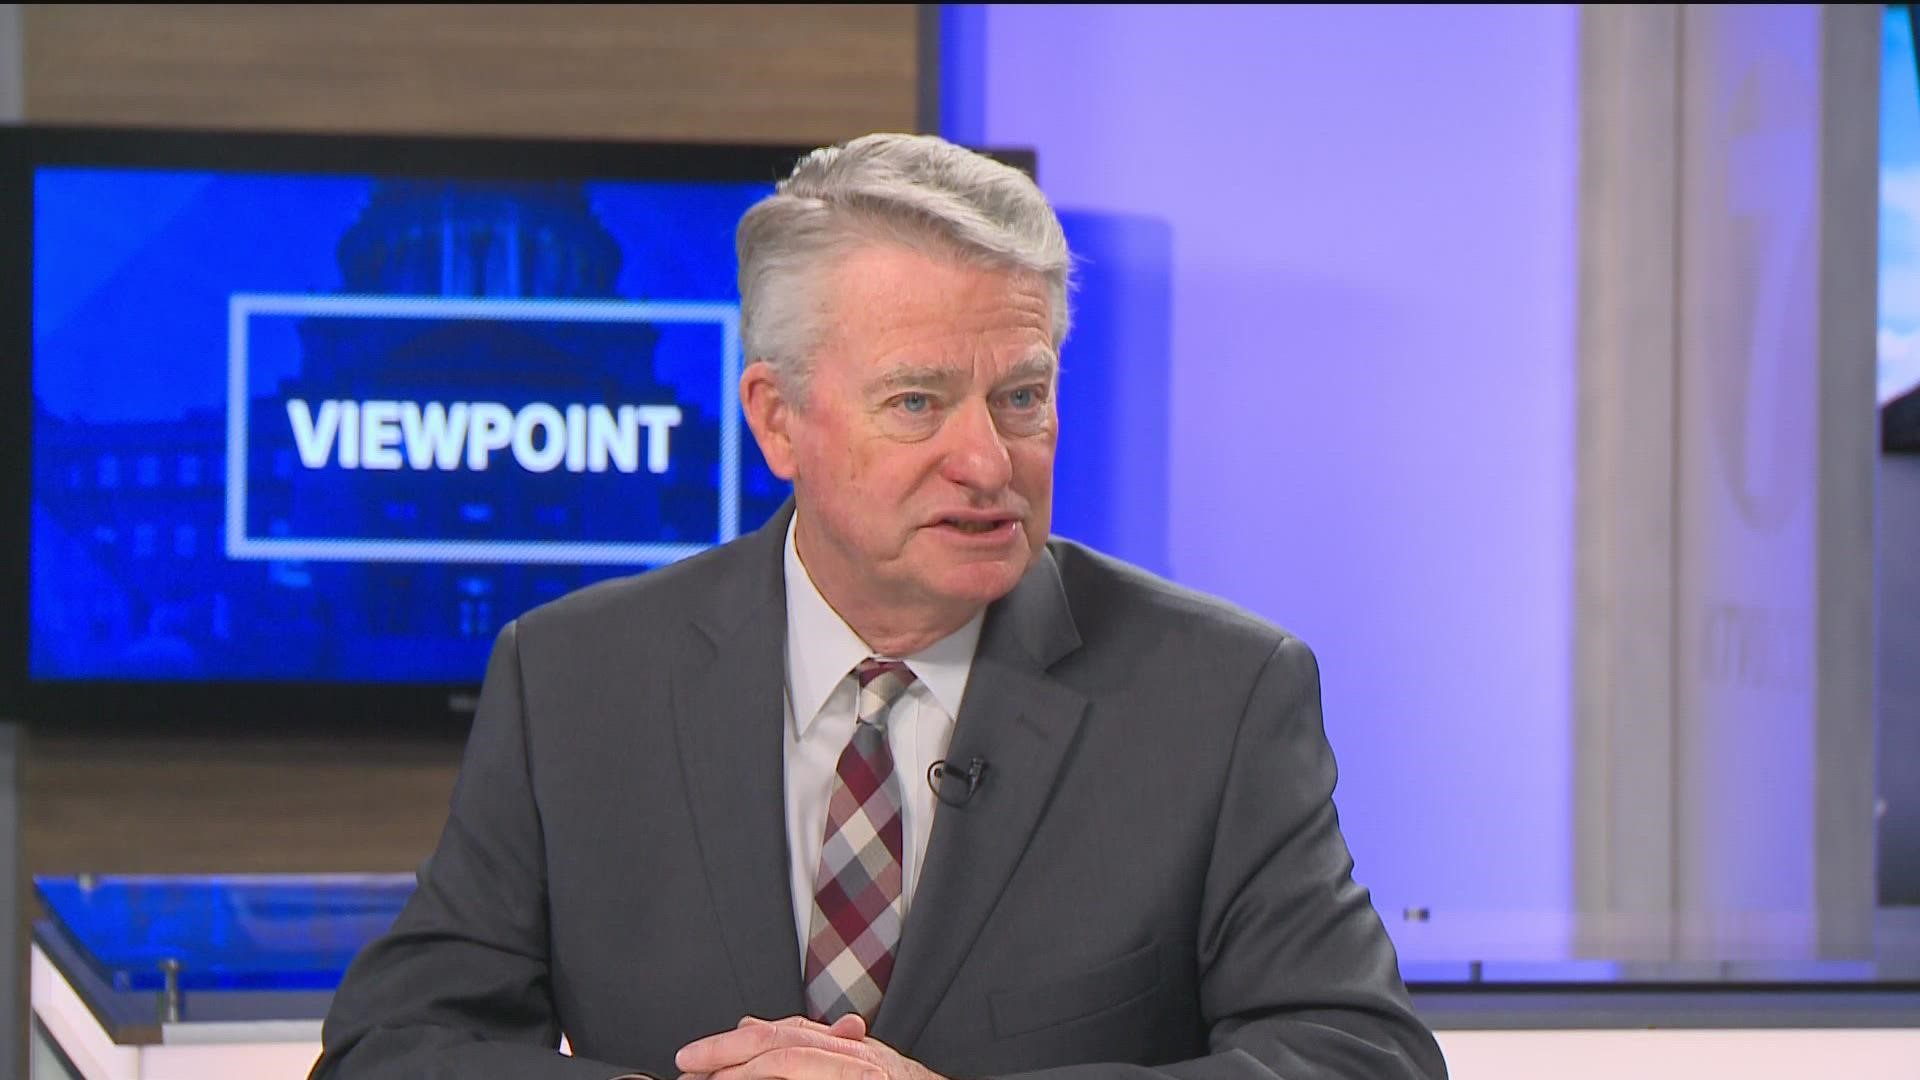 Gov. Little said he did have an opportunity to talk with the victims' parents. You can watch the full interview on KTVB's Viewpoint at 9 p.m. on Sunday.